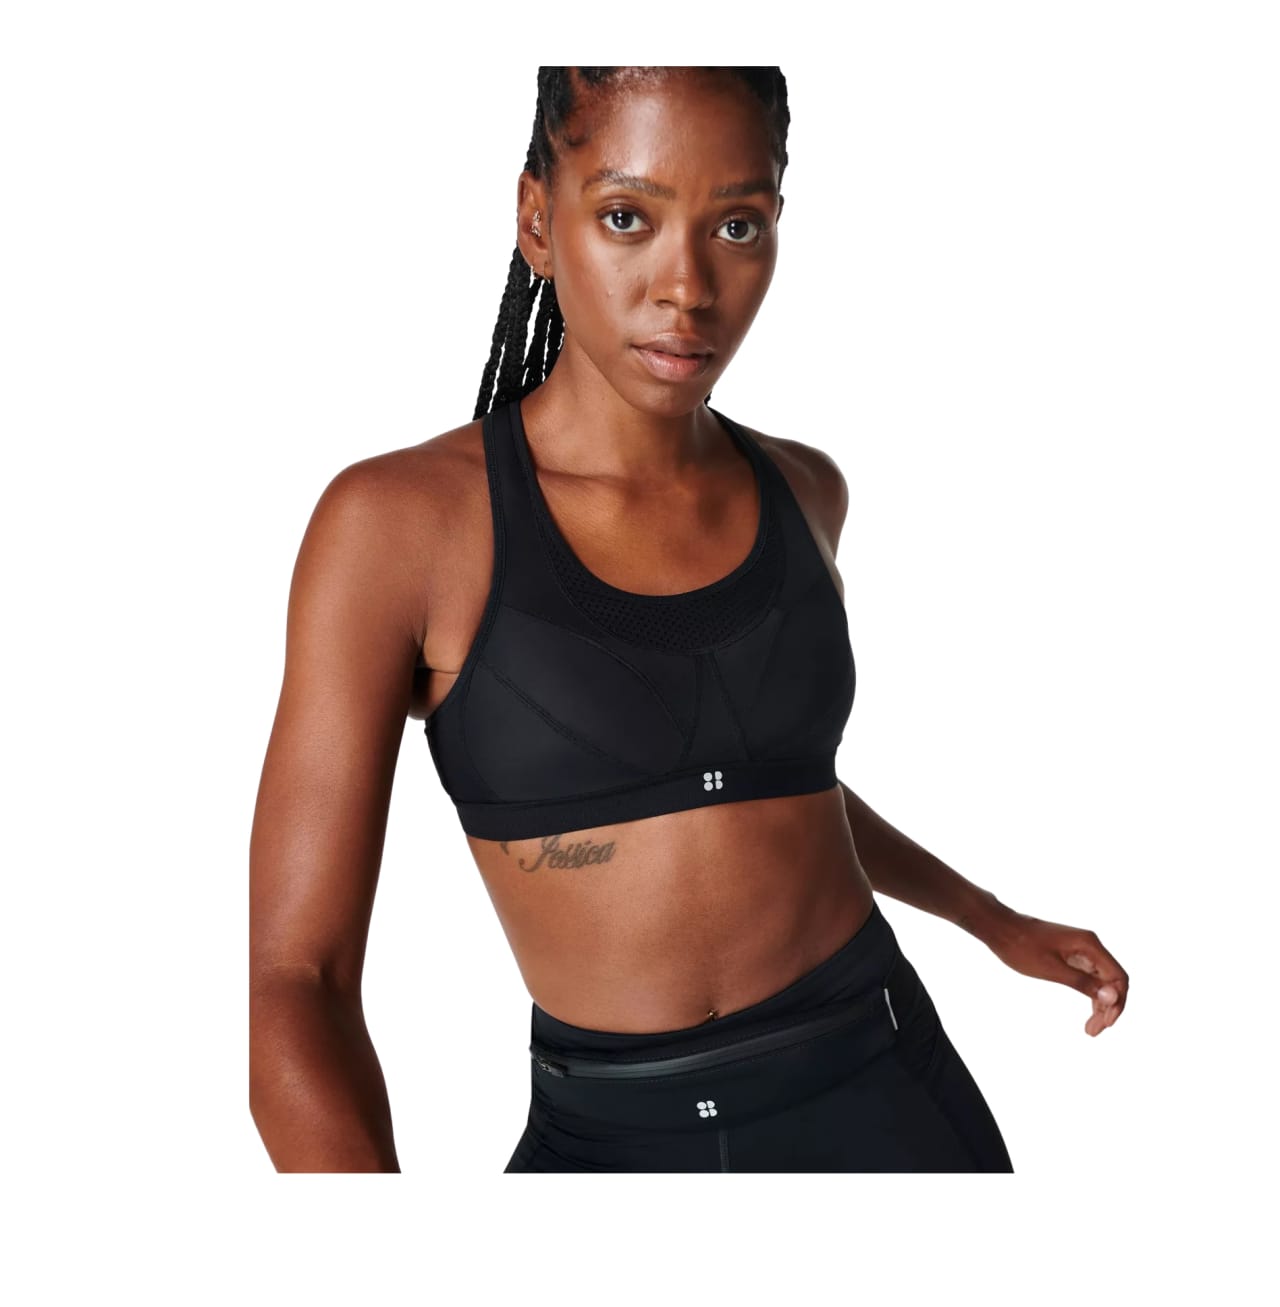 These are the best sports bras that have launched in 2018